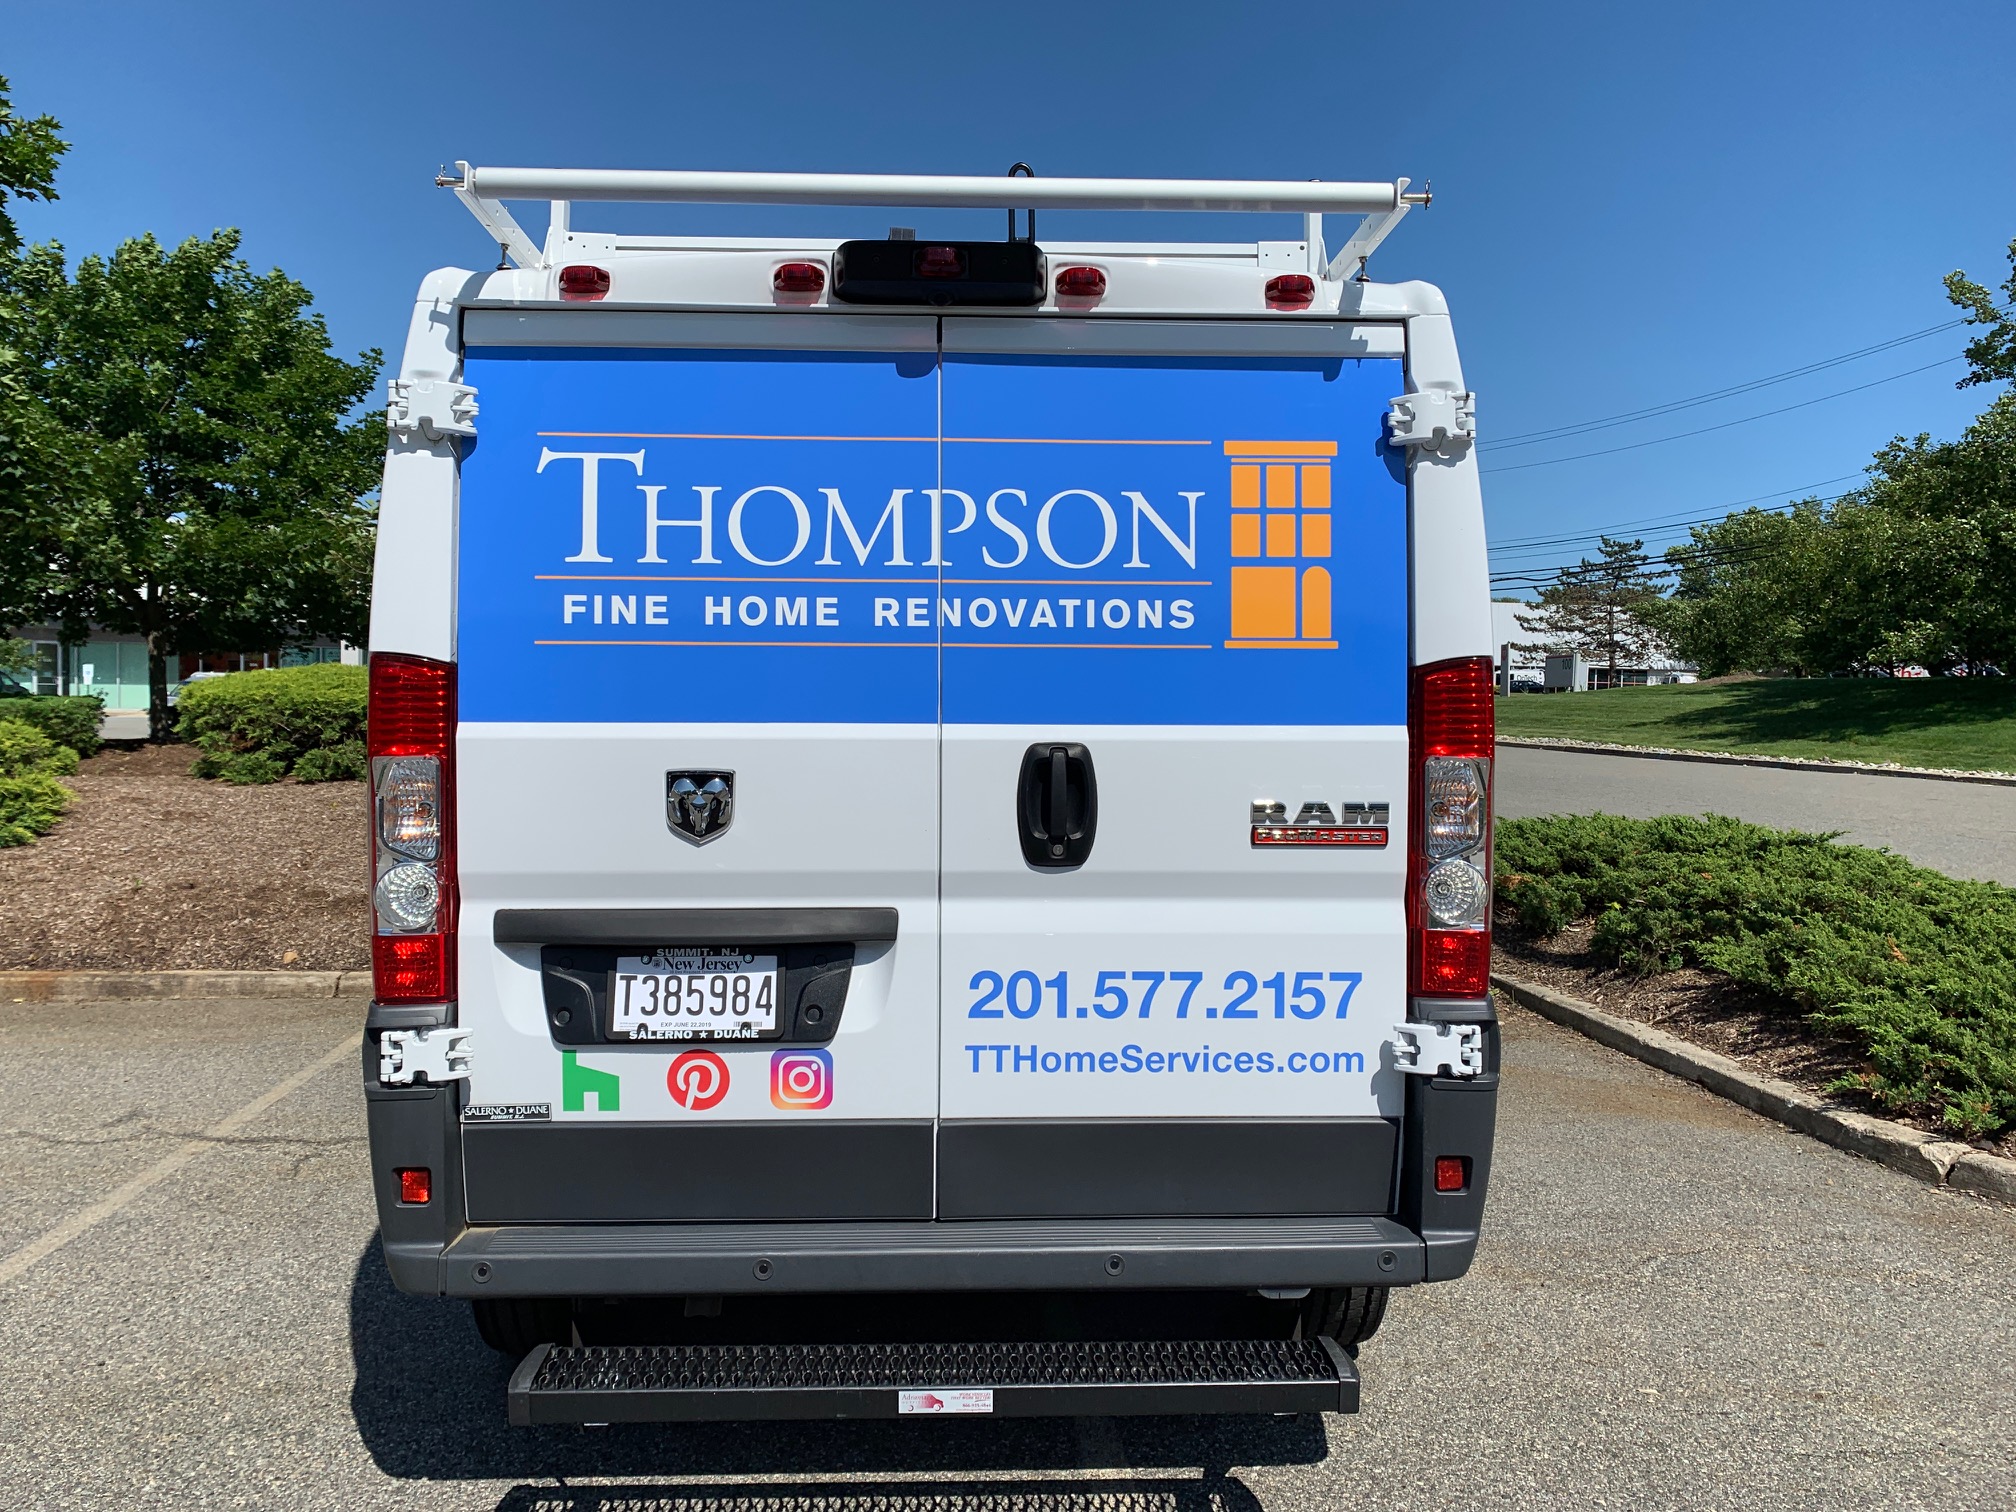 Back of white van with blue wrap that says Thompson Fine Home Renovations in white with an outline of a building in orange.